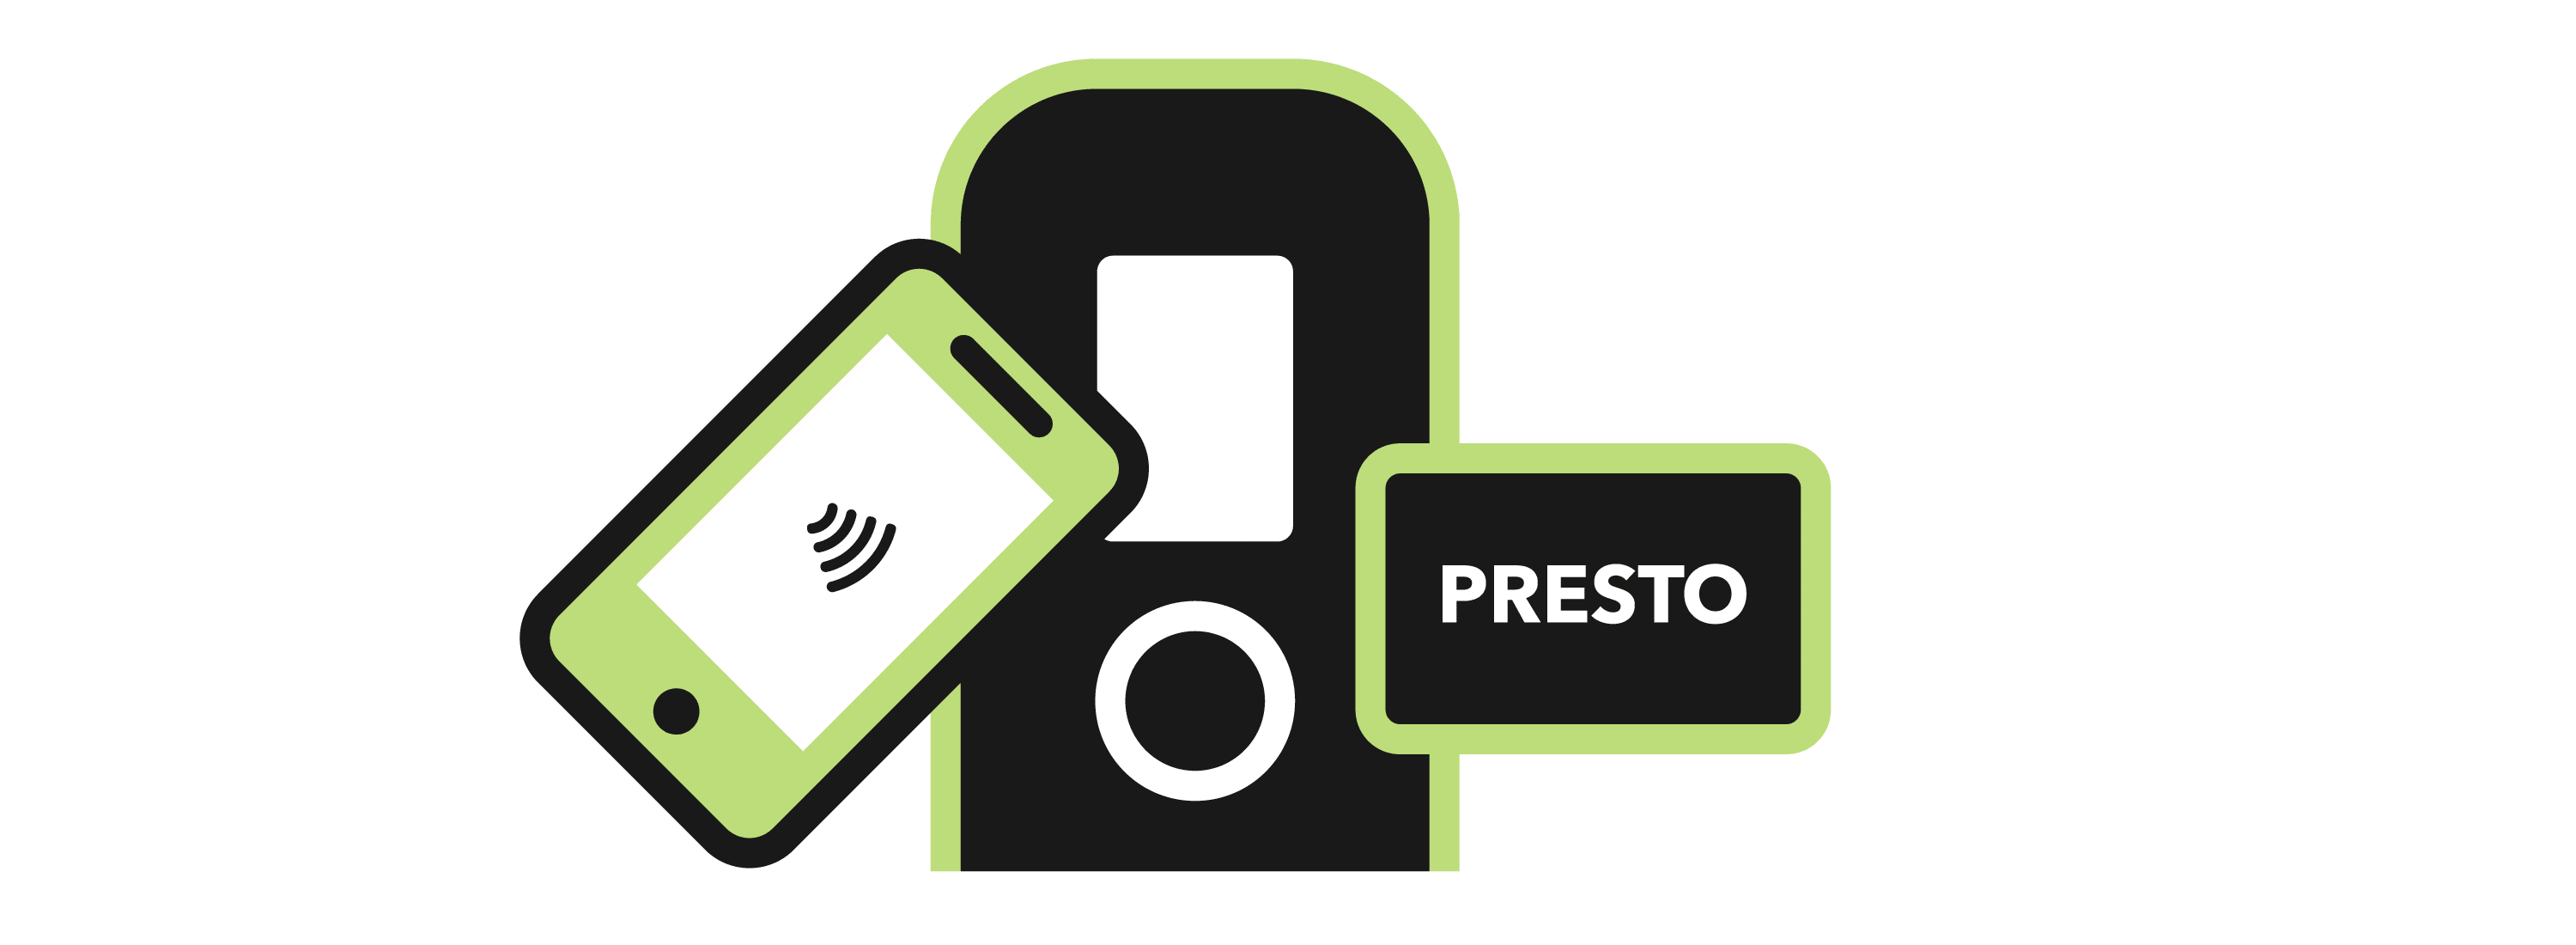 Graphic representing how to use your PRESTO card on GO Transit